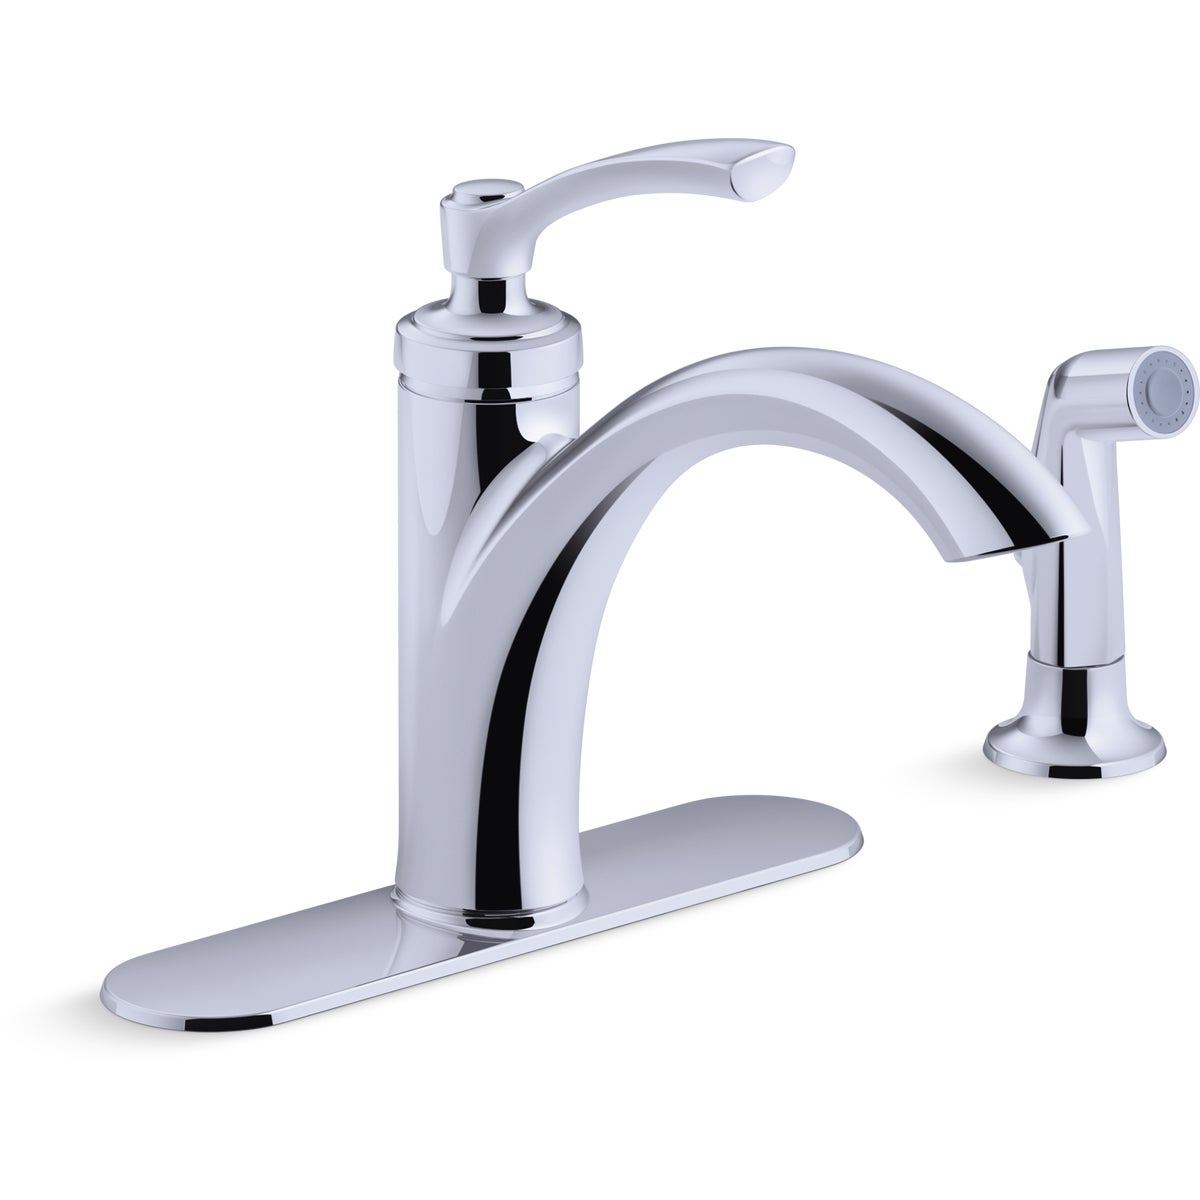 Item 404651, With a simple silhouette and a clean, flowing design, the Linwood faucet is